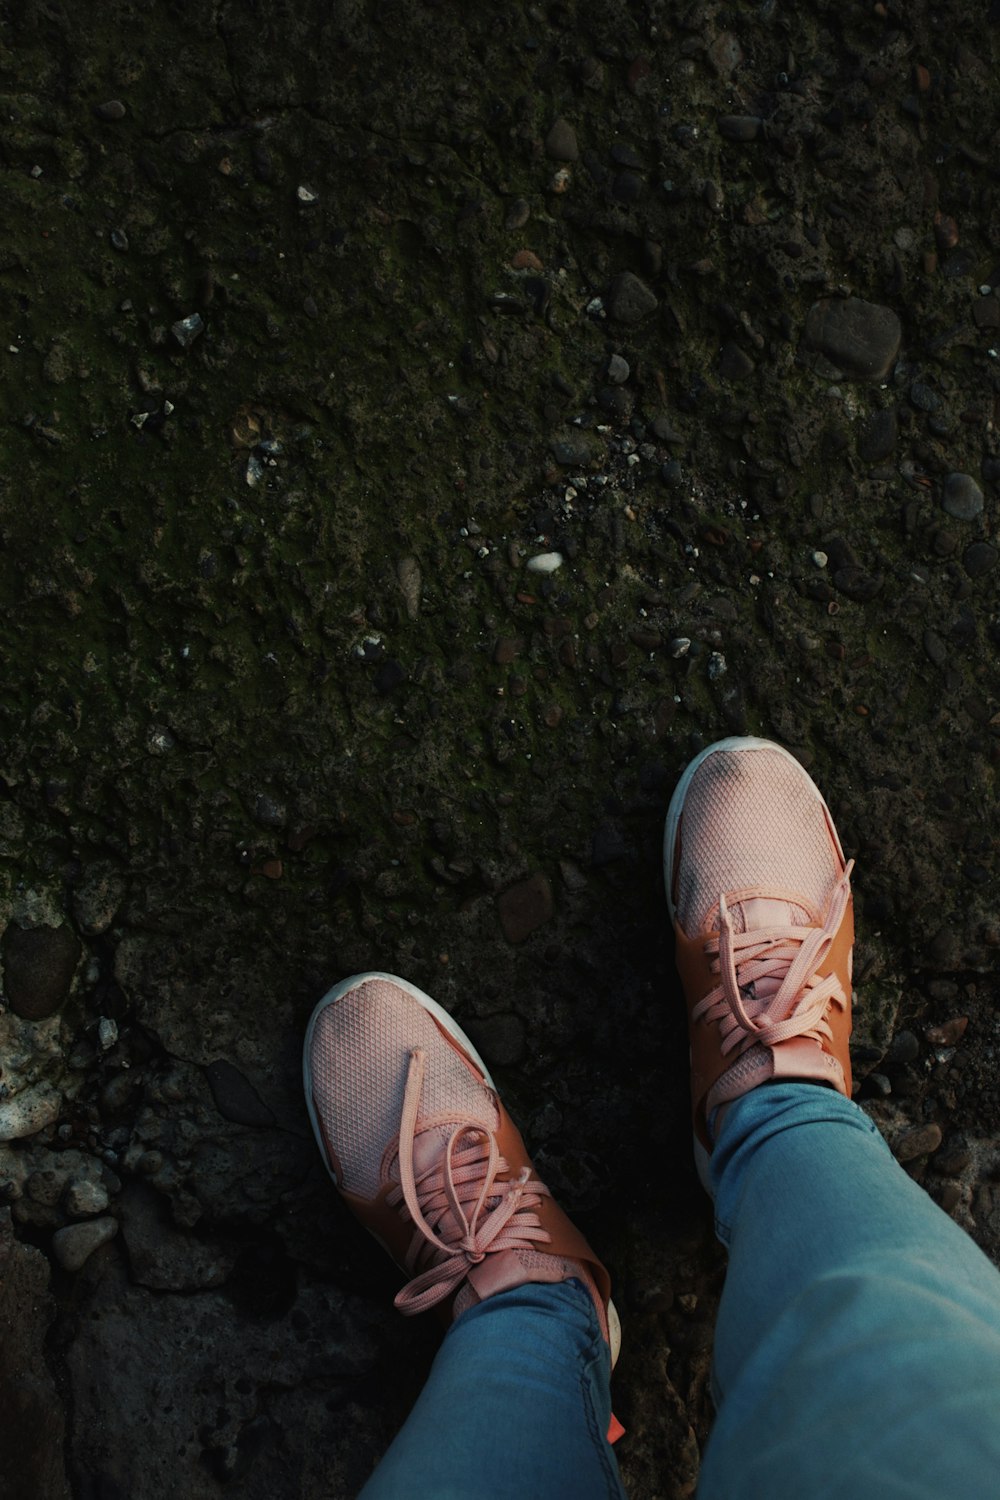 a person wearing pink tennis shoes standing on a rocky ground